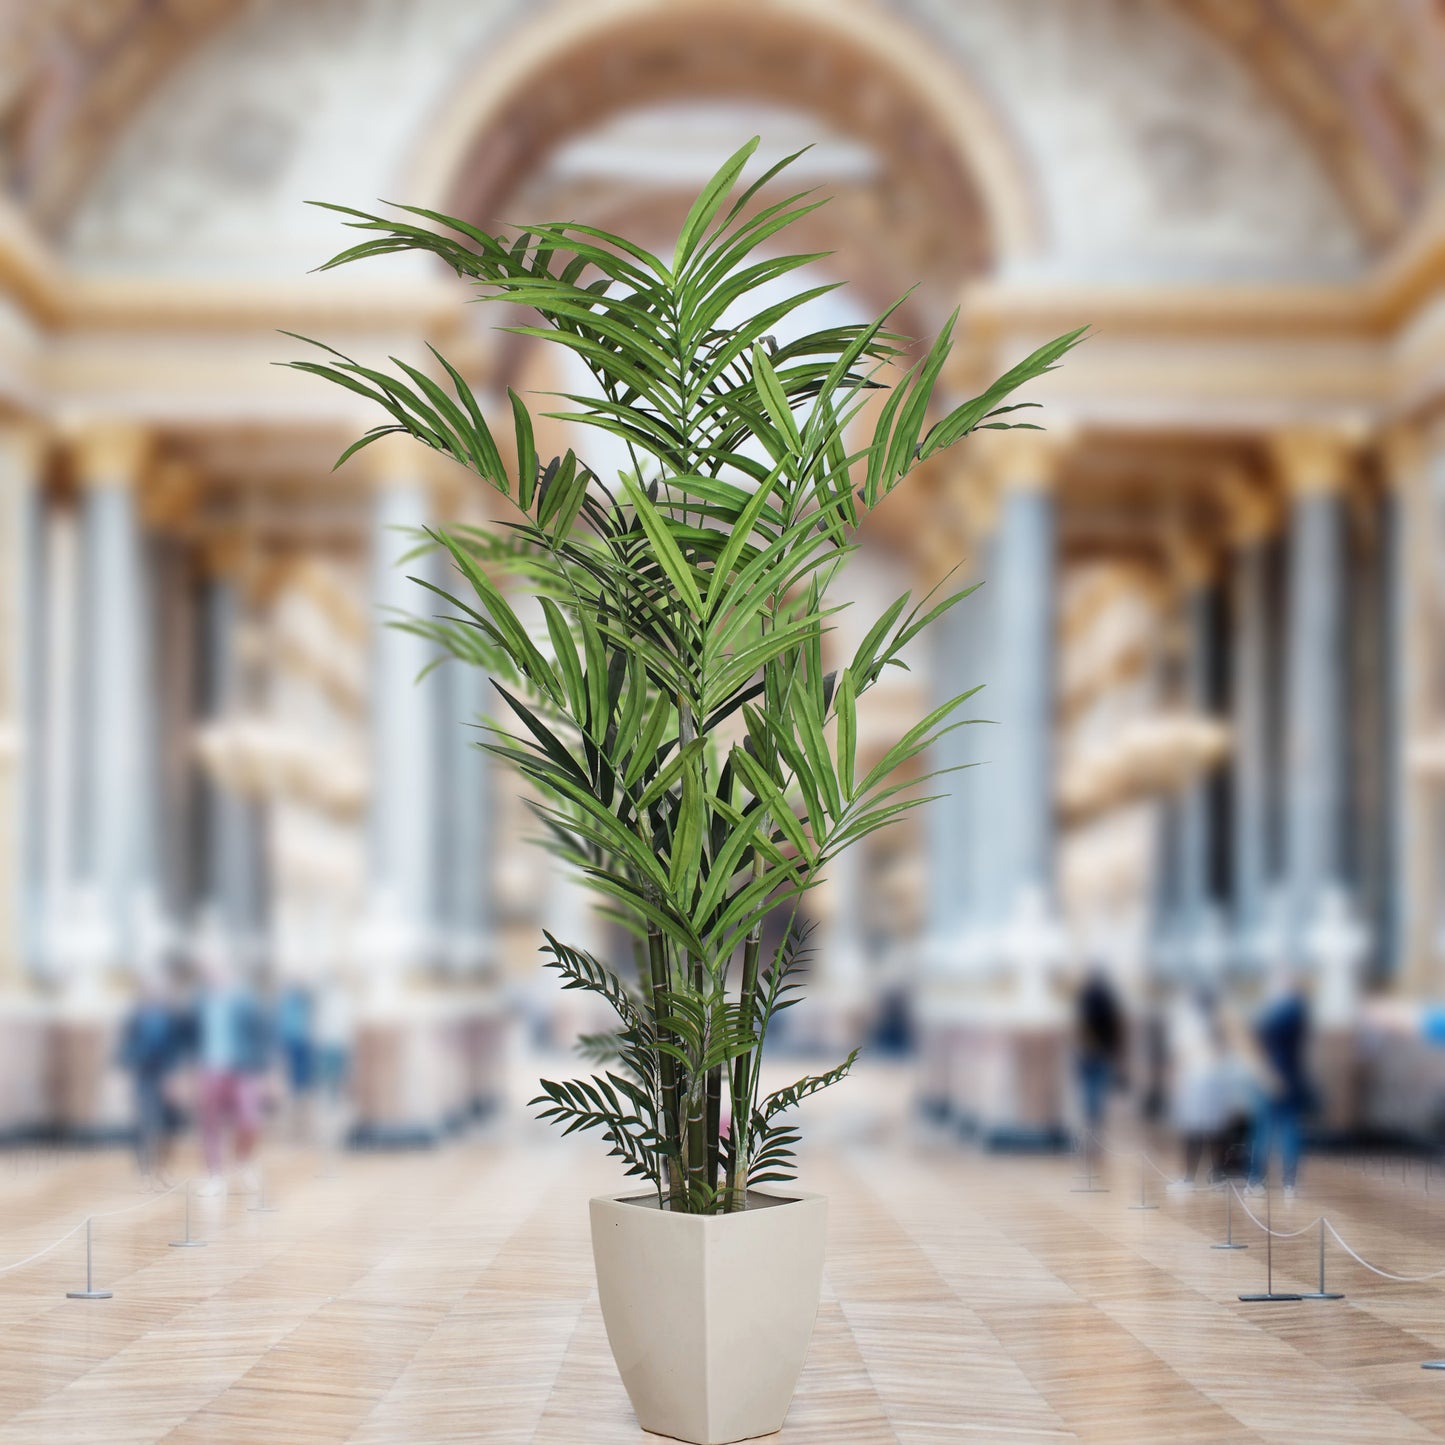 Lush 8' Indoor Kentia Palm Tree with 399 Leaves - Potted Tropical Foliage Decor for Home or Office